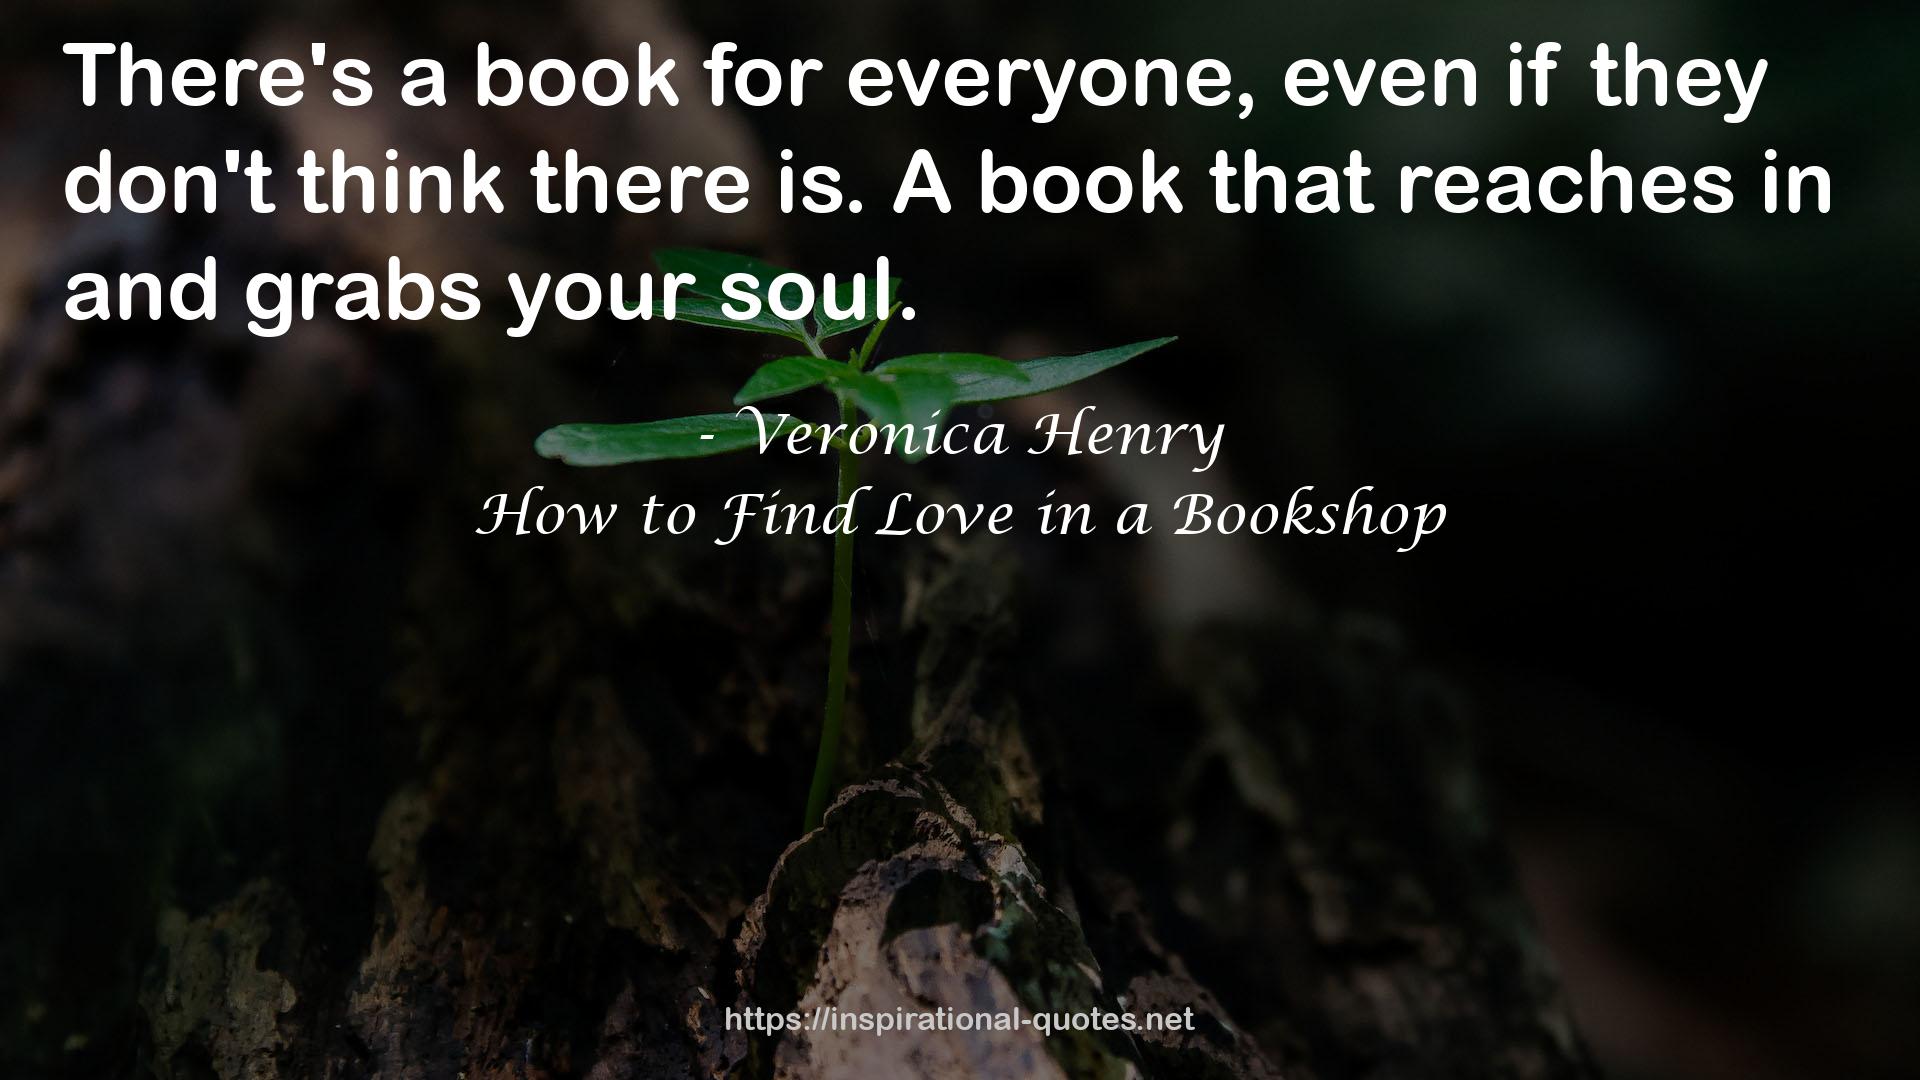 Veronica Henry QUOTES